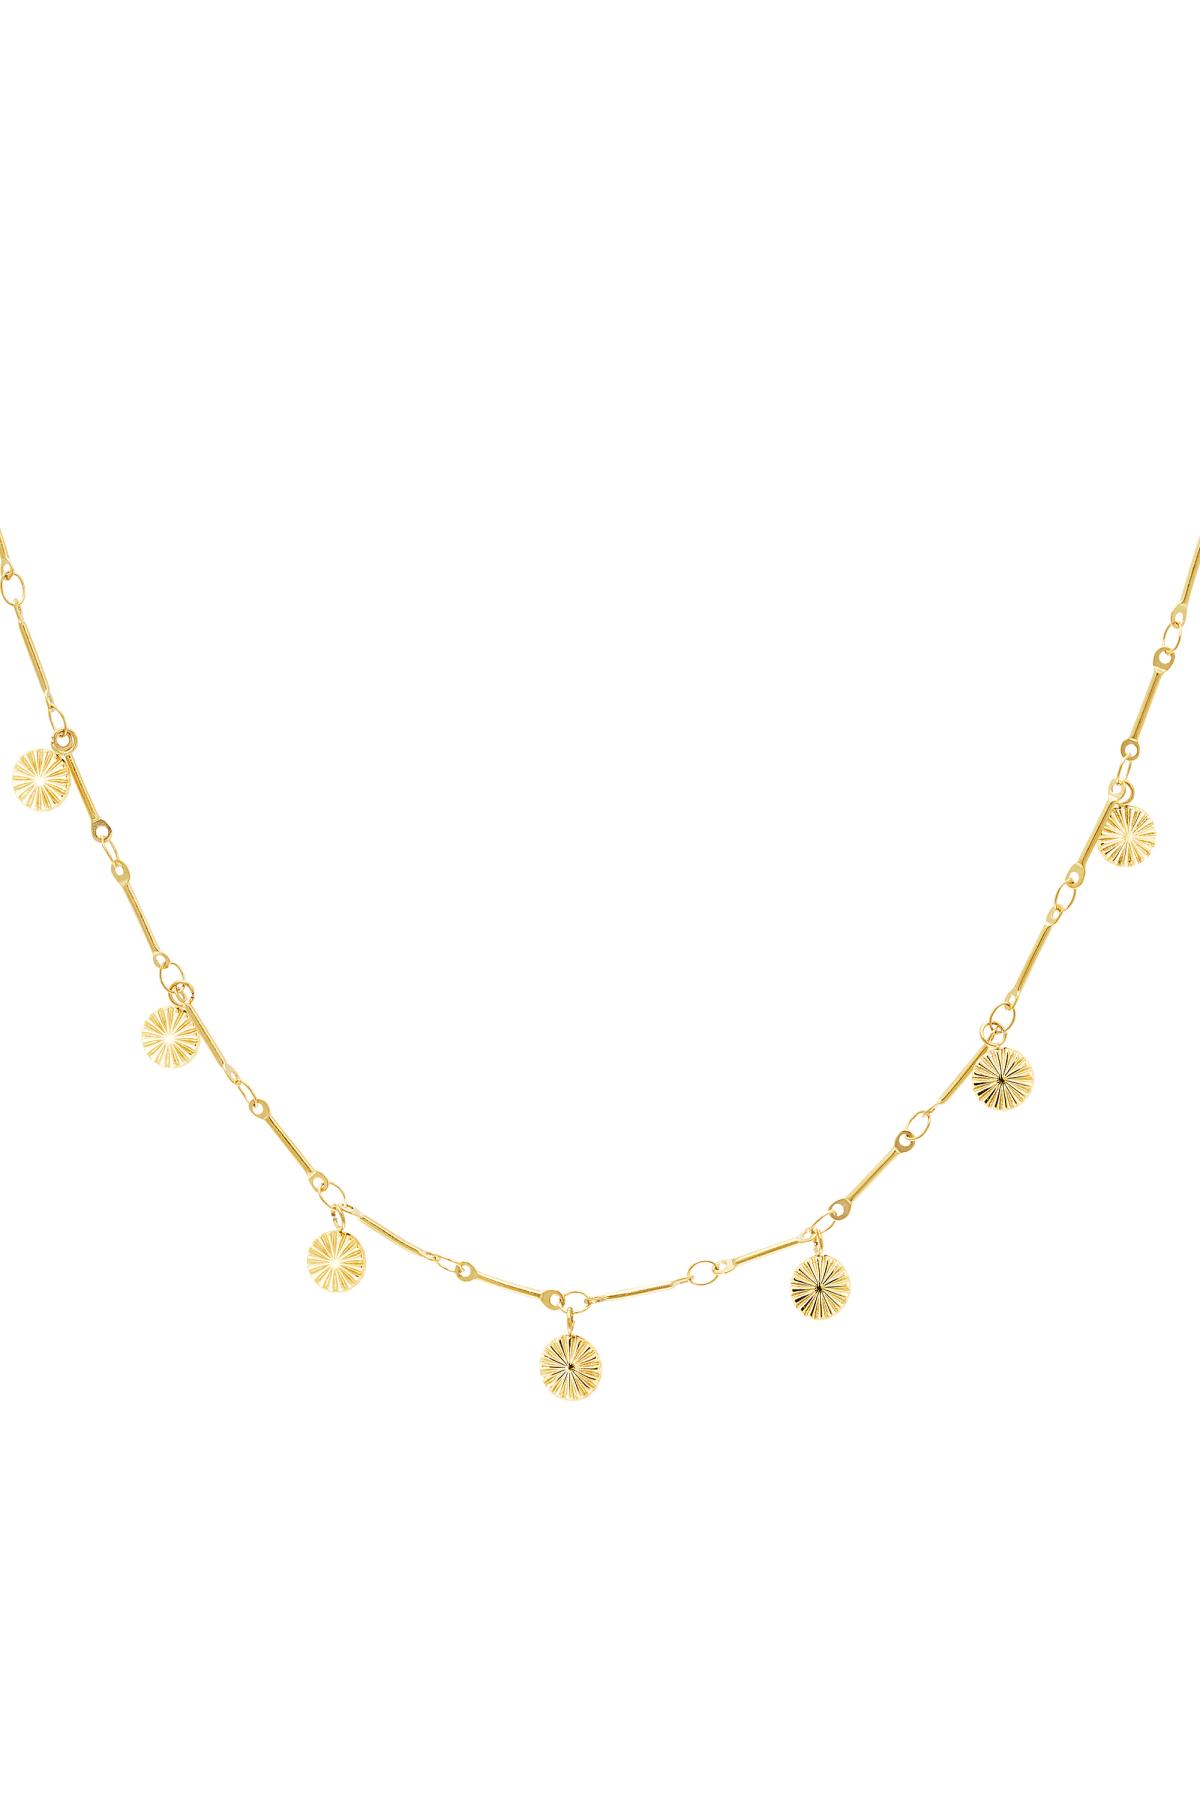 Necklace with flower coin charms Gold Stainless Steel 